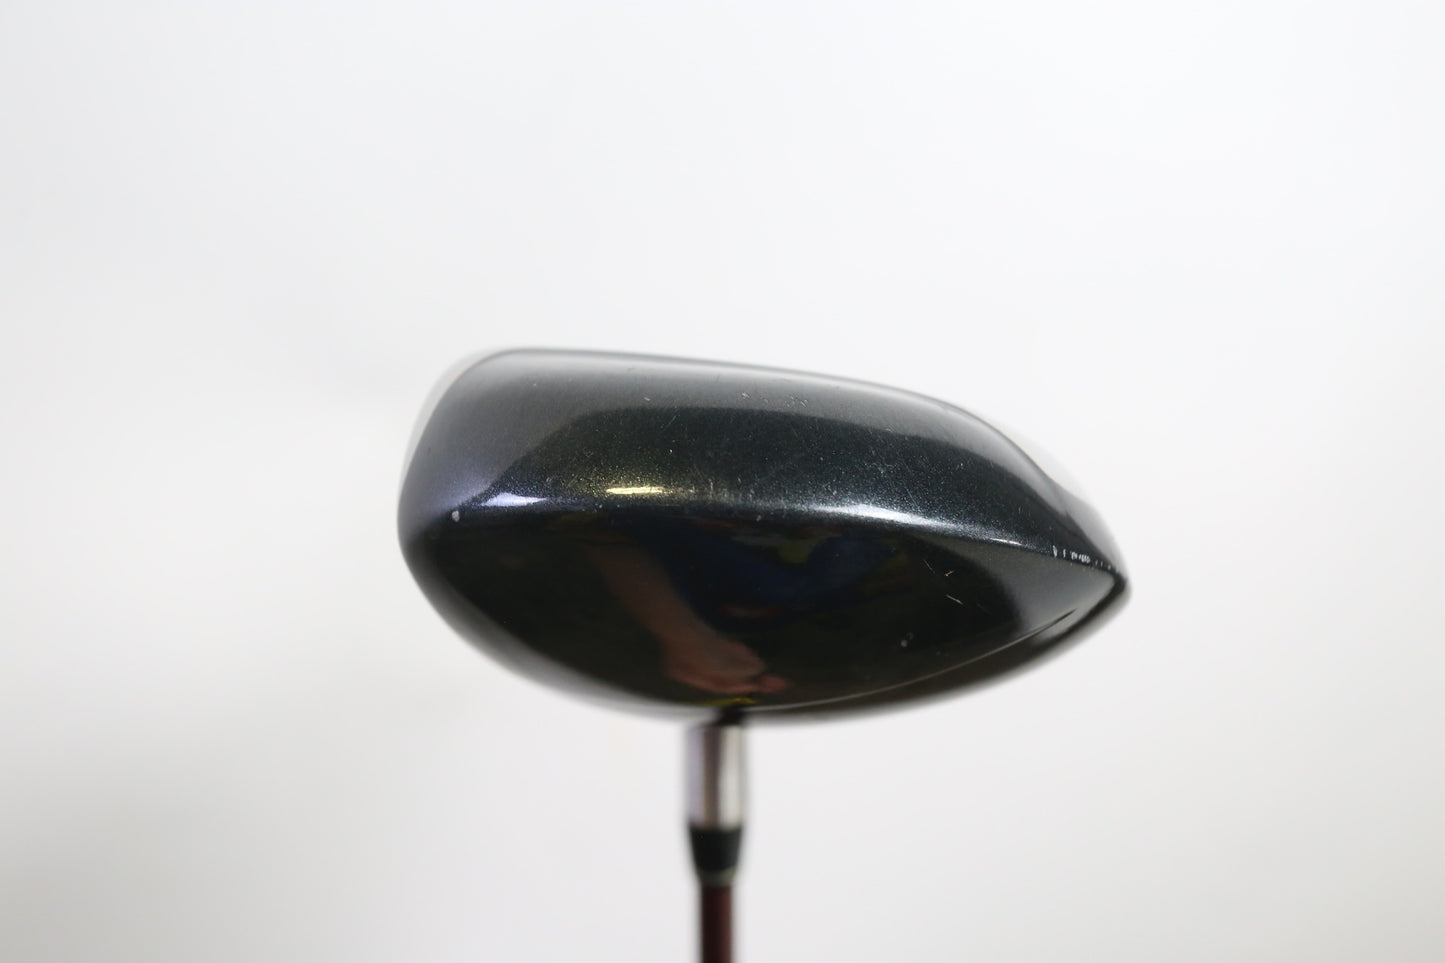 Used TaylorMade 320 Driver - Right-Handed - 9.5 Degrees - Stiff Flex-Next Round